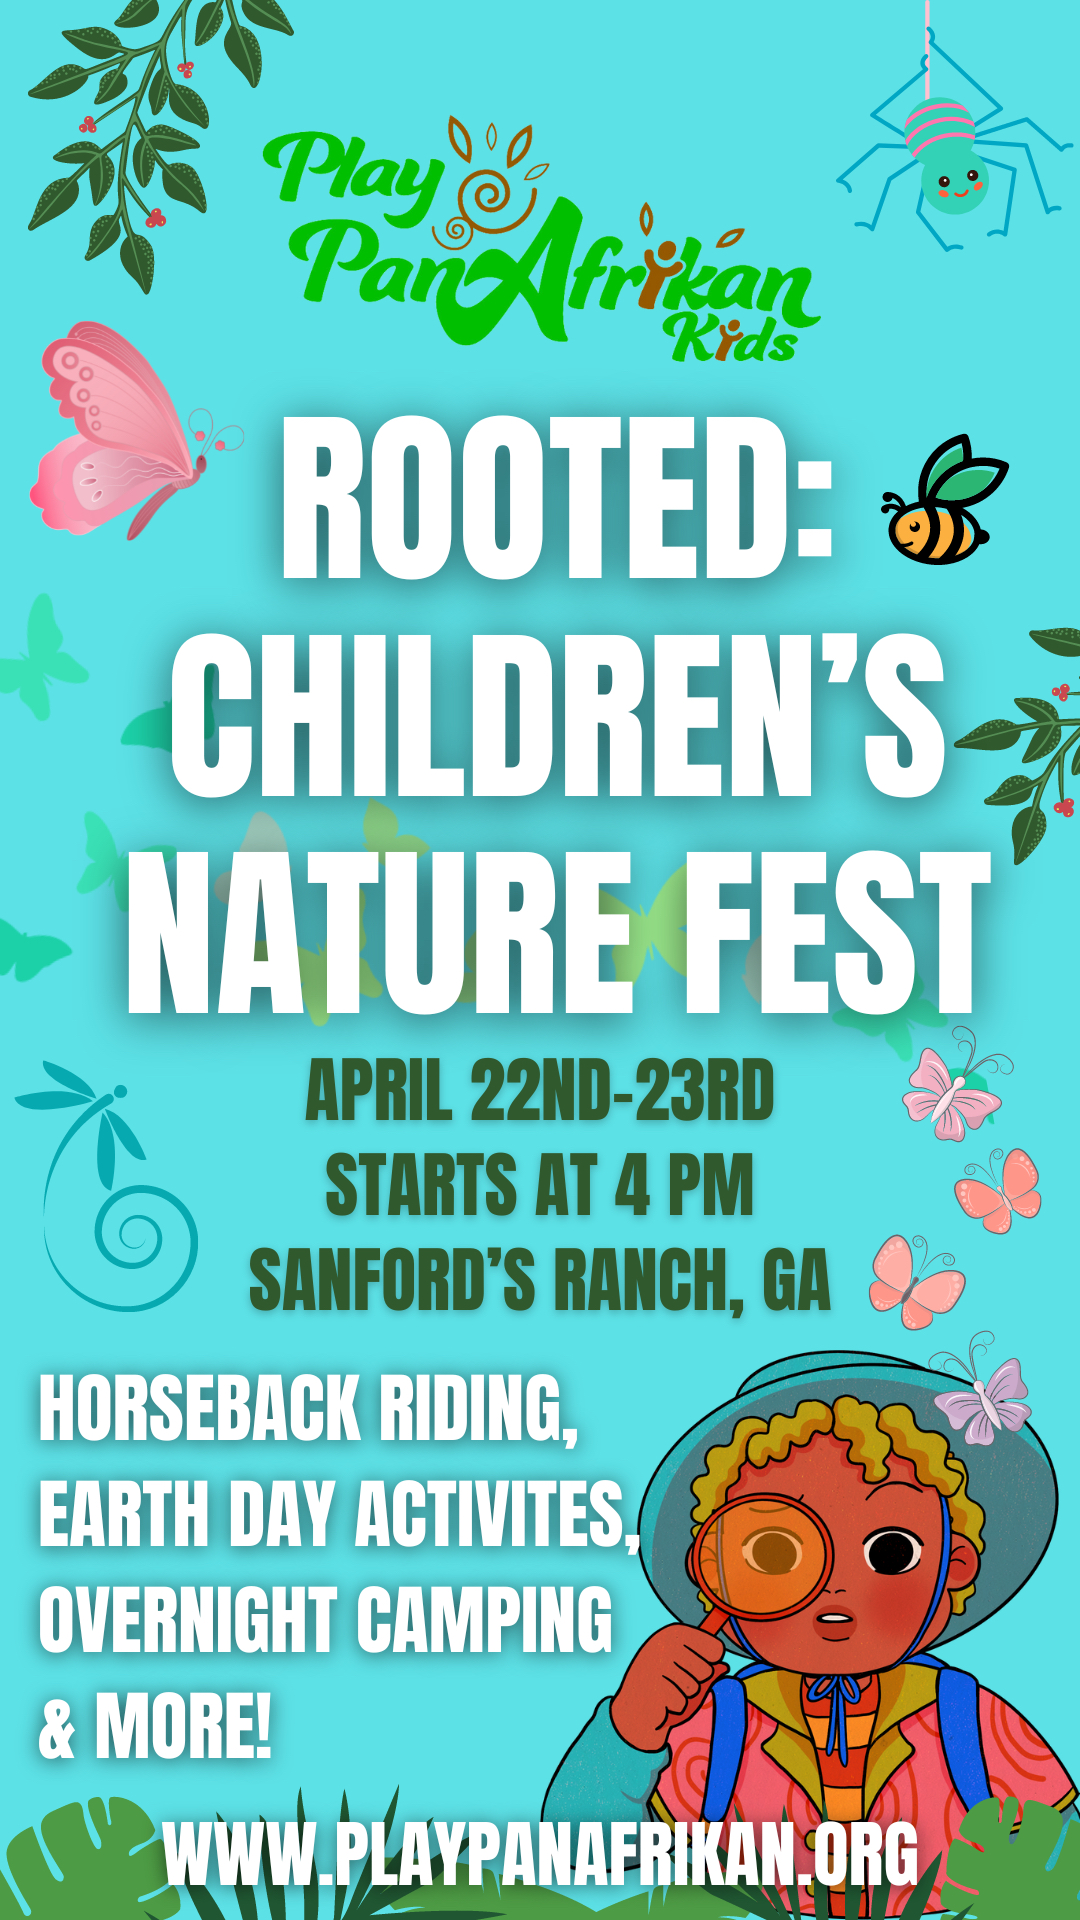 Rooted-Children’s Nature Fest